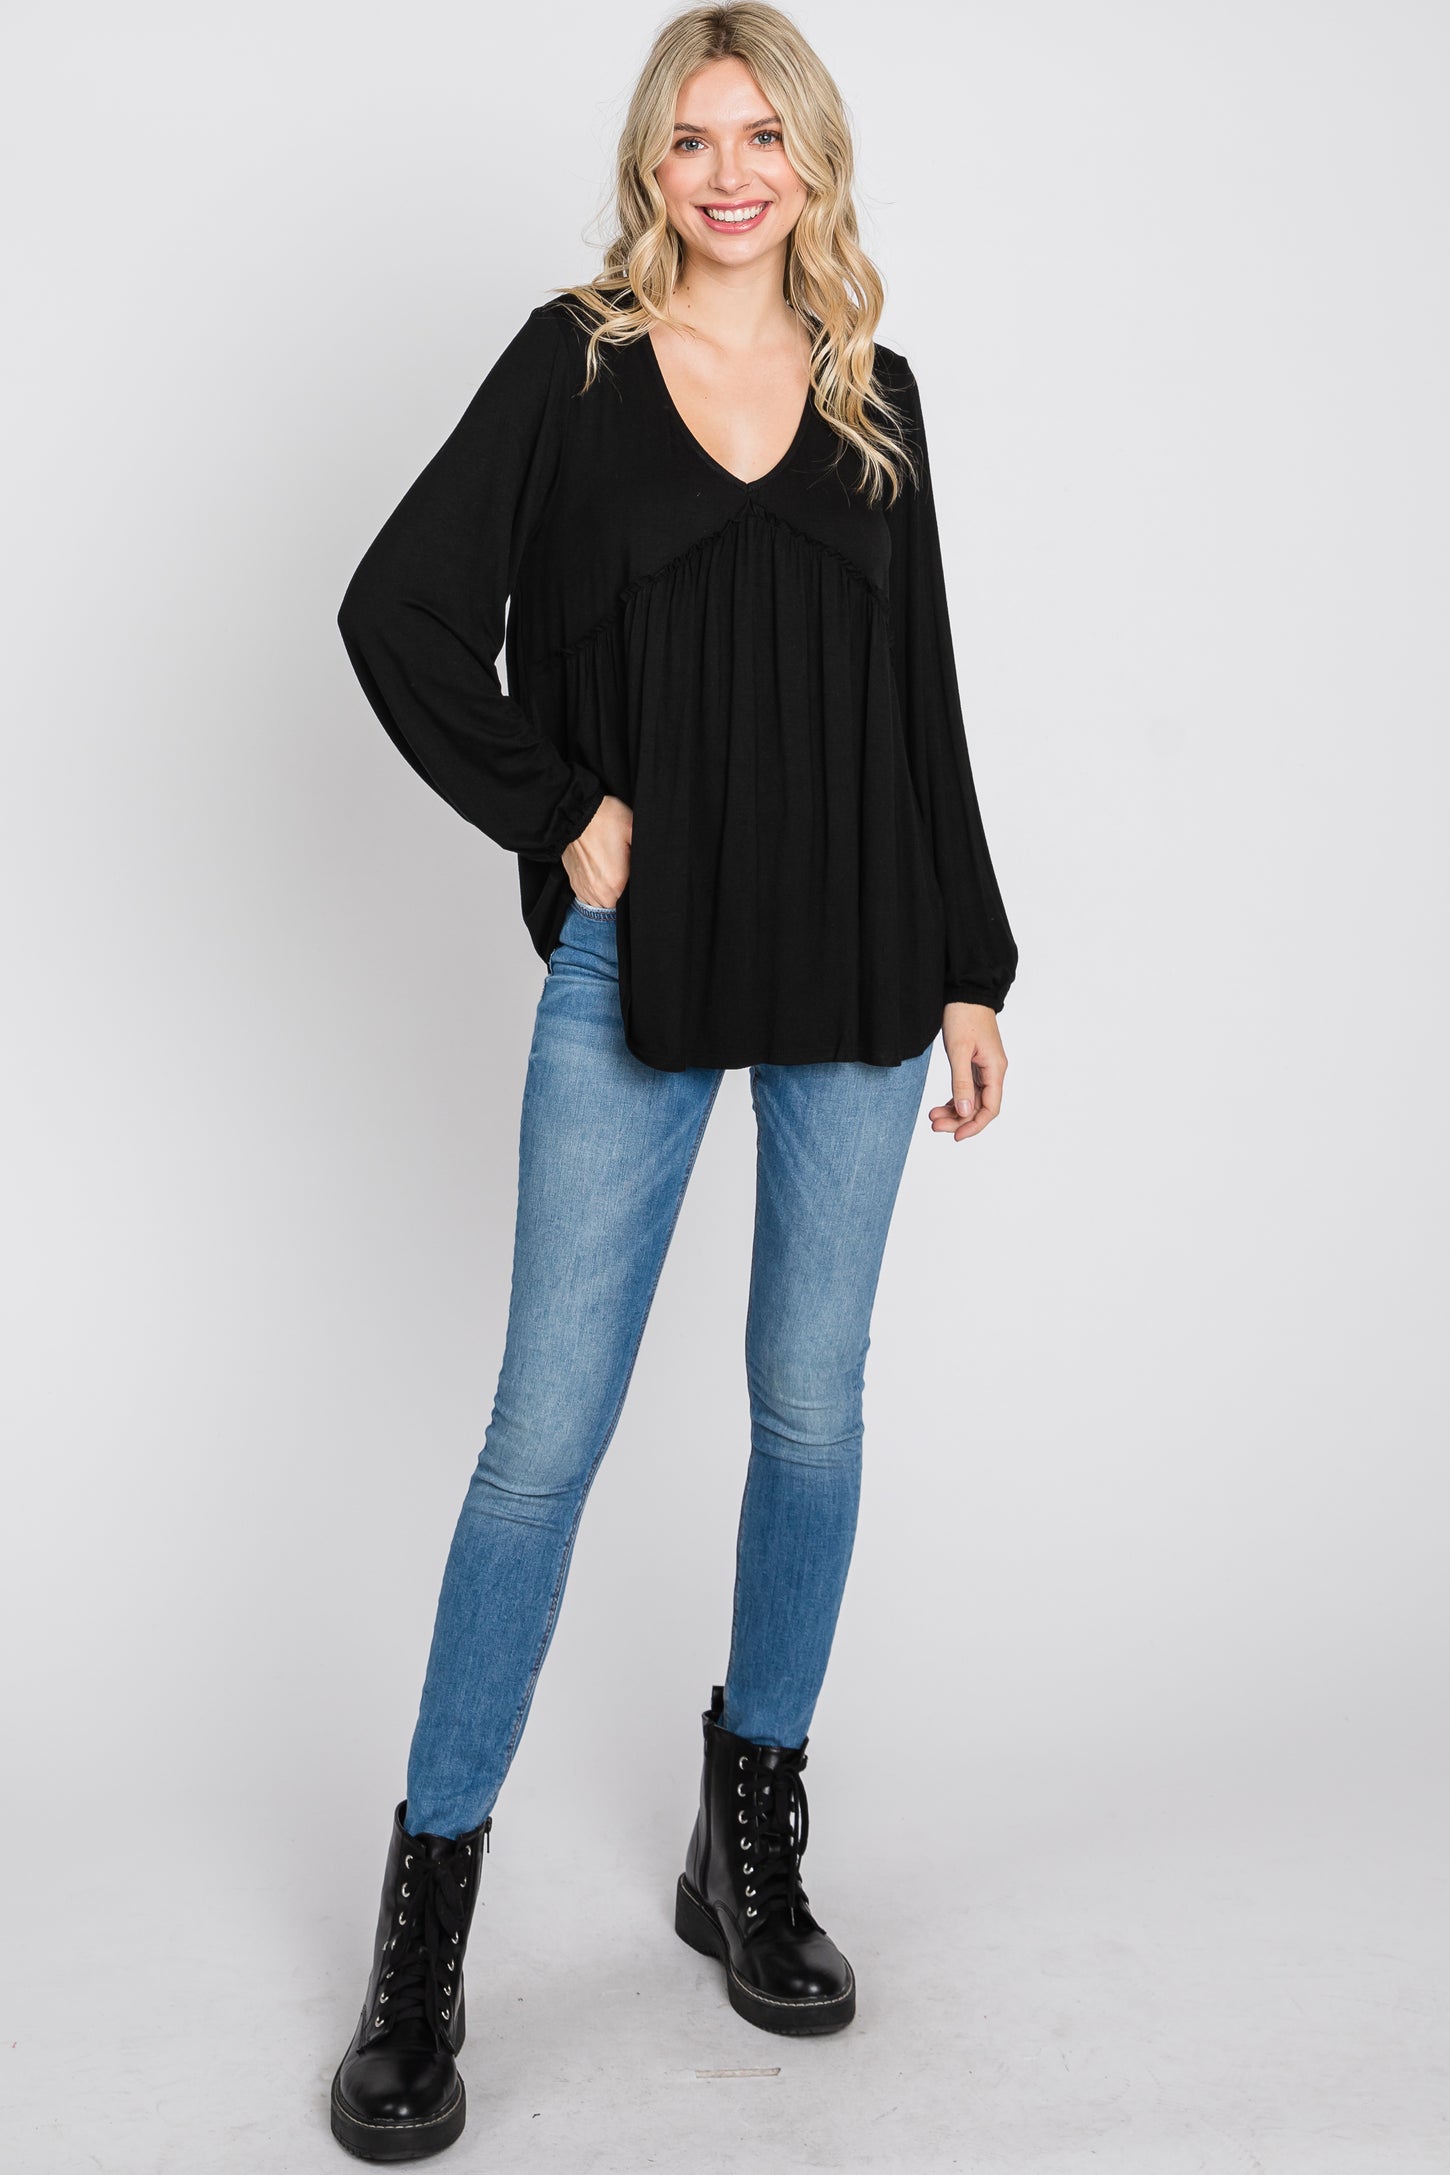 Black V-Neck Ruffle Accent Long Sleeve Top